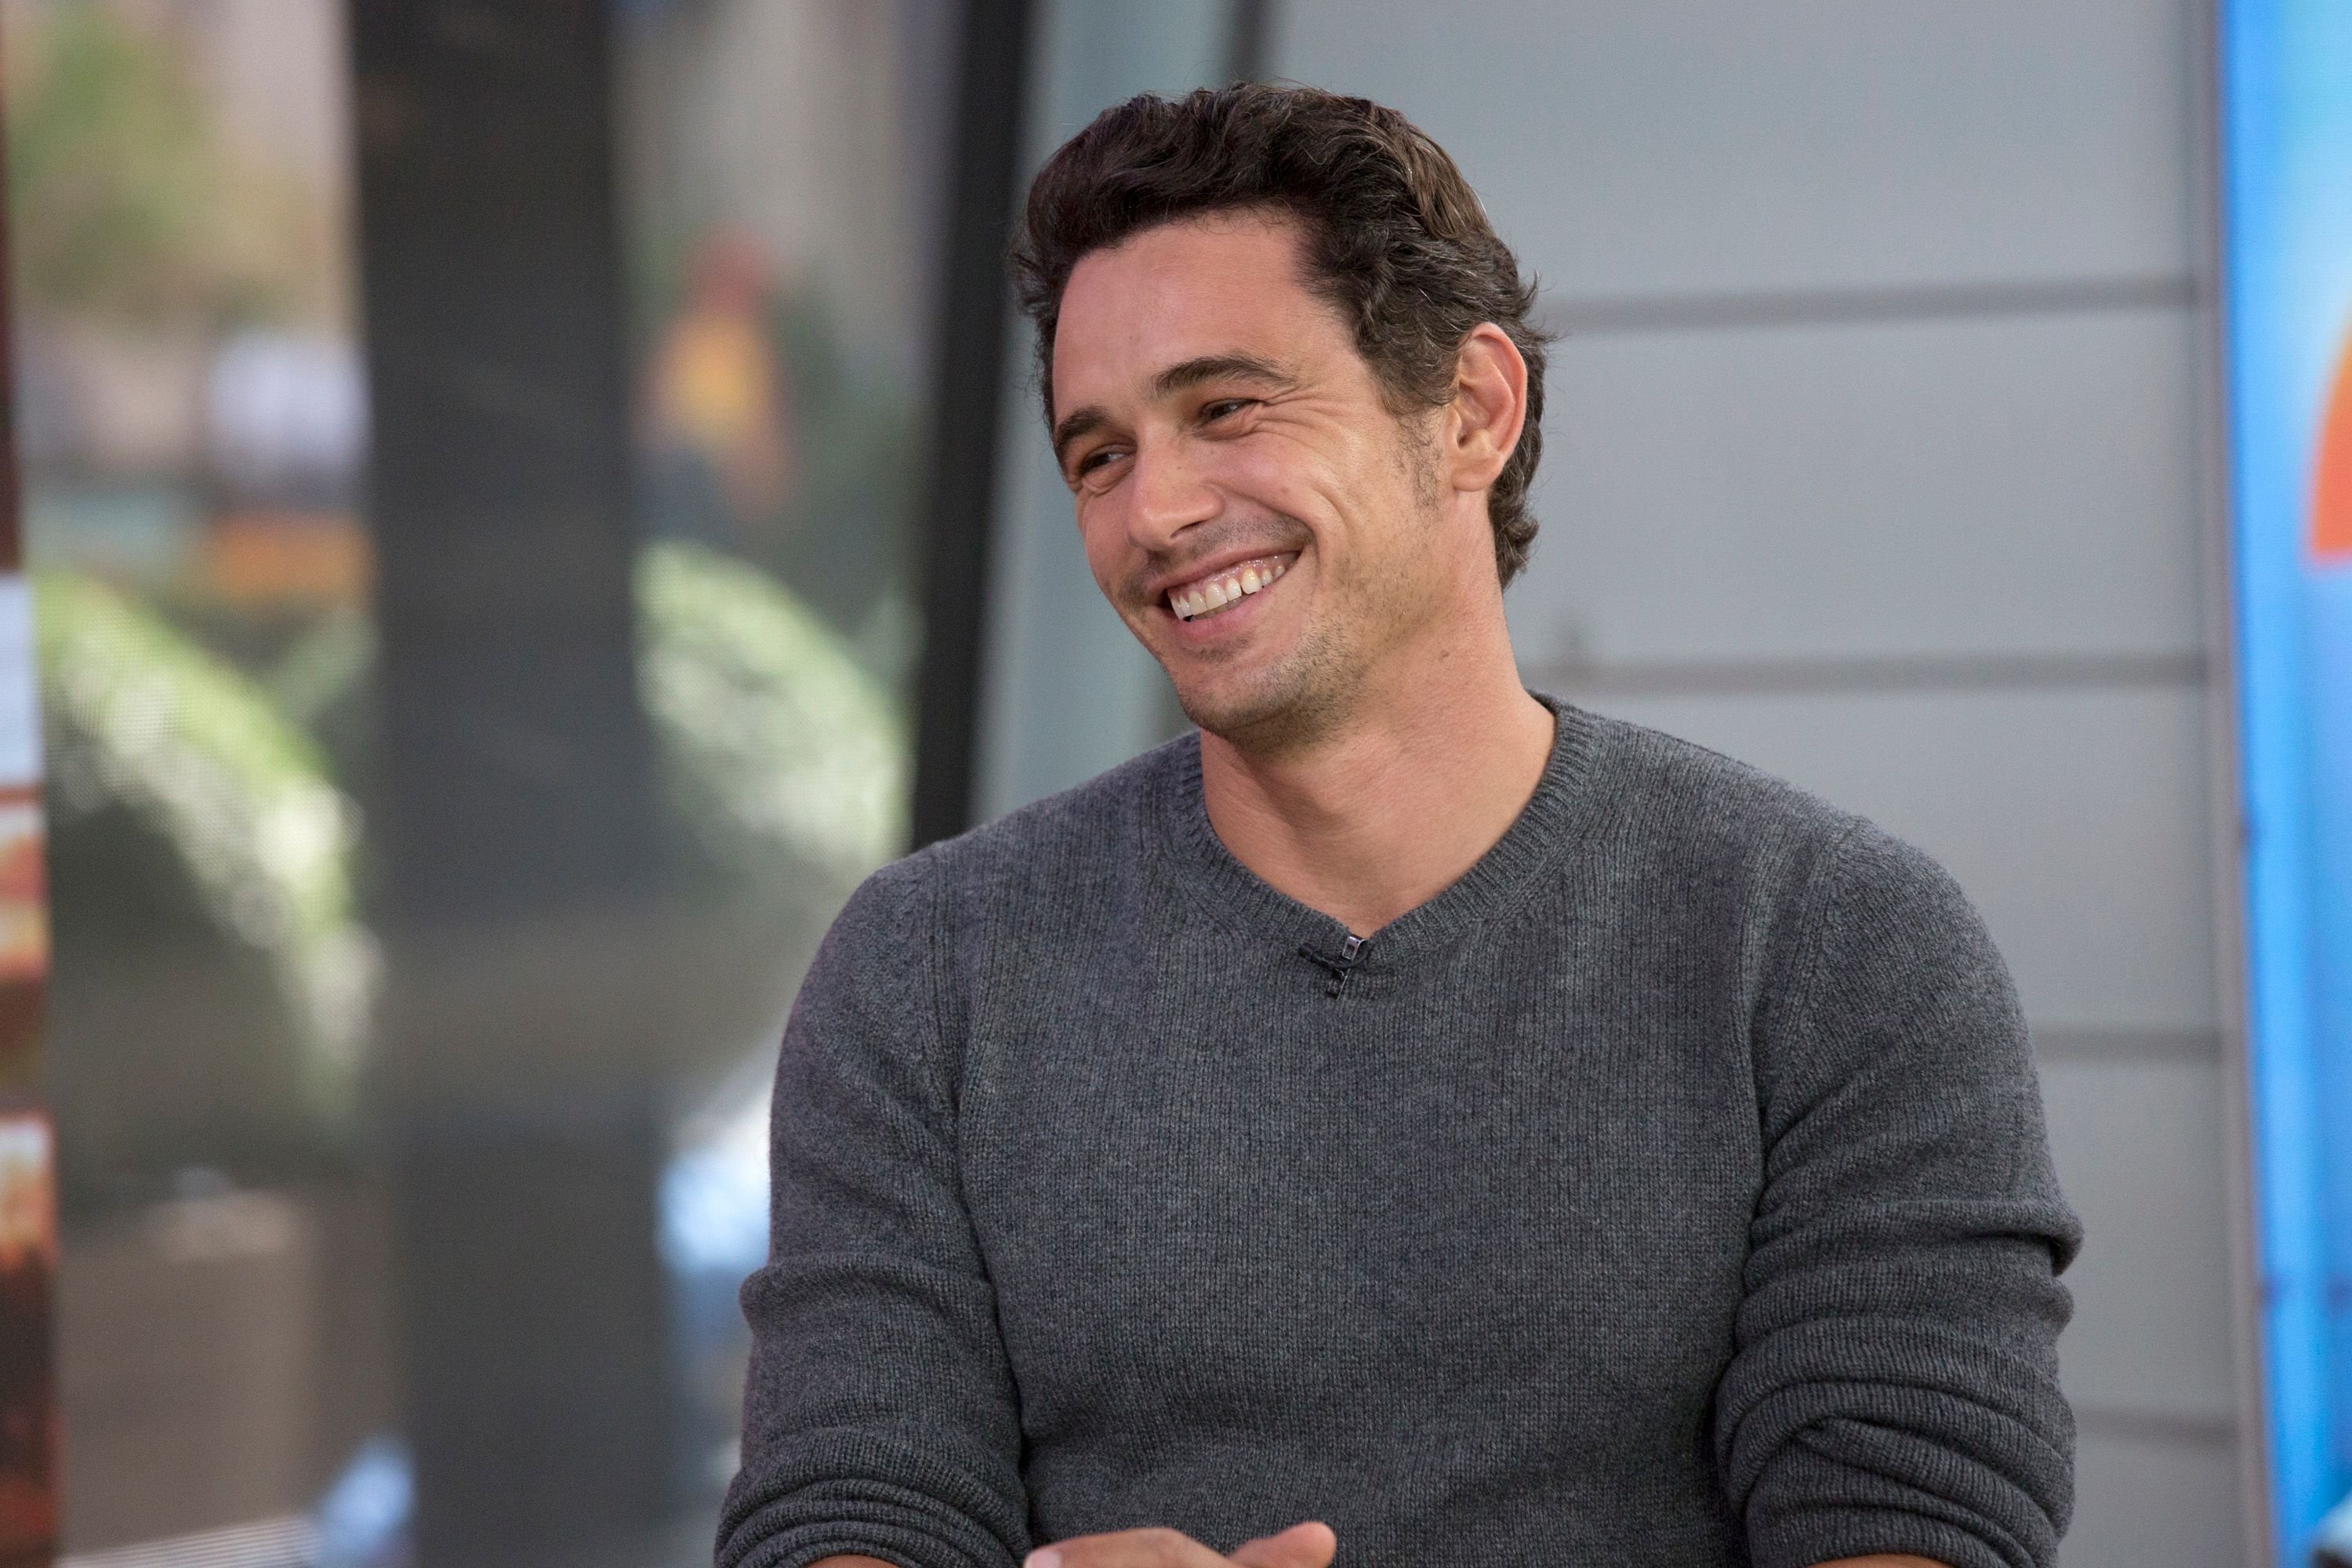 James Franco on 'TODAY' on September 9, 2017 | Photo: Getty Images